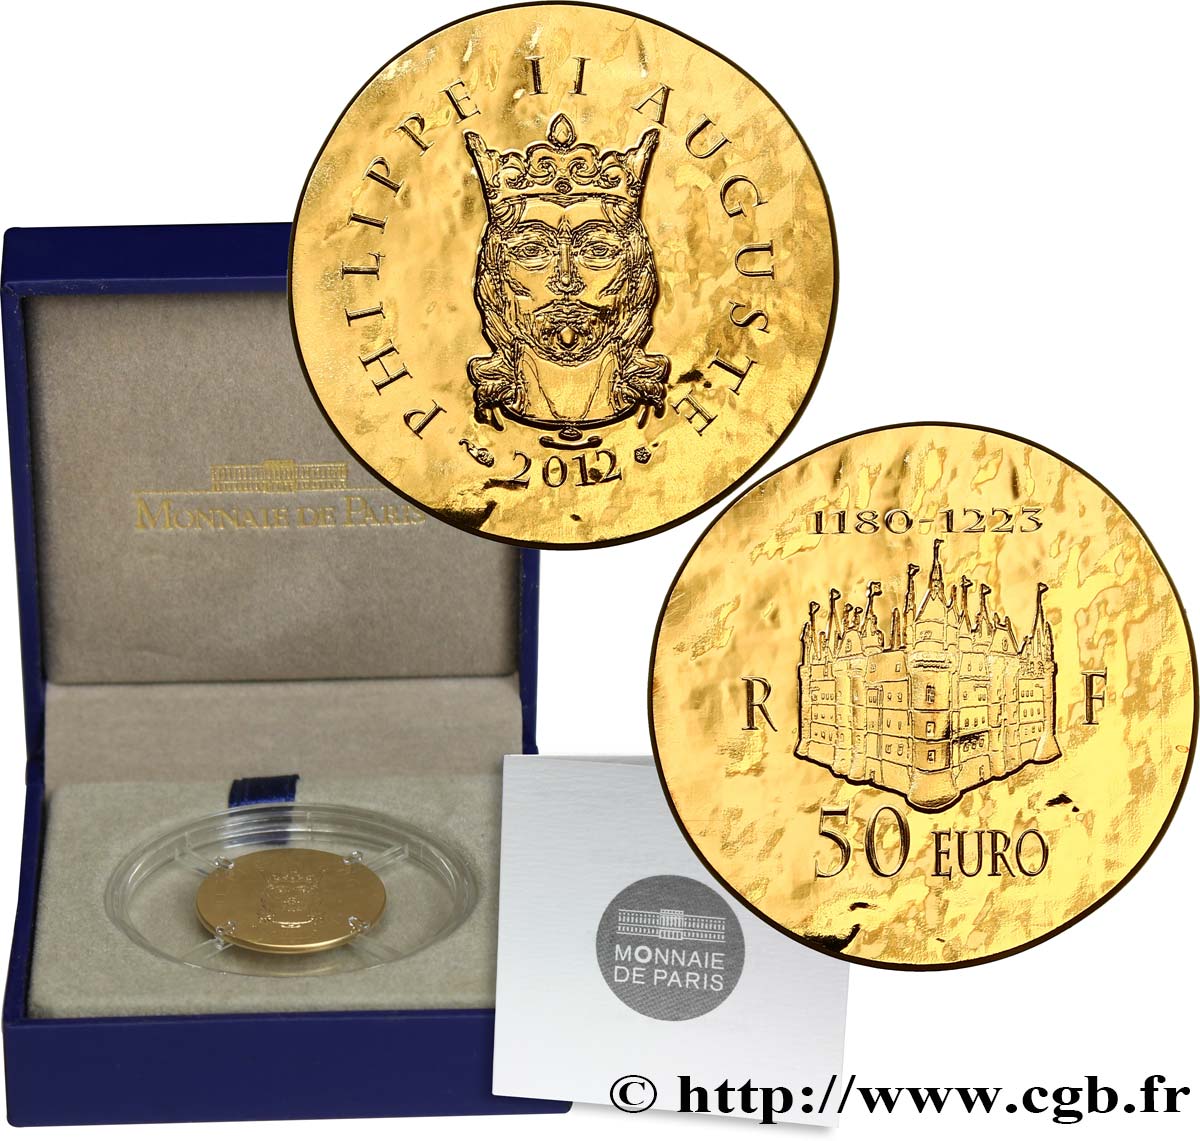 FRANKREICH Belle Épreuve 50 Euro or PHILIPPE II AUGUSTE (1/4 once) 2012